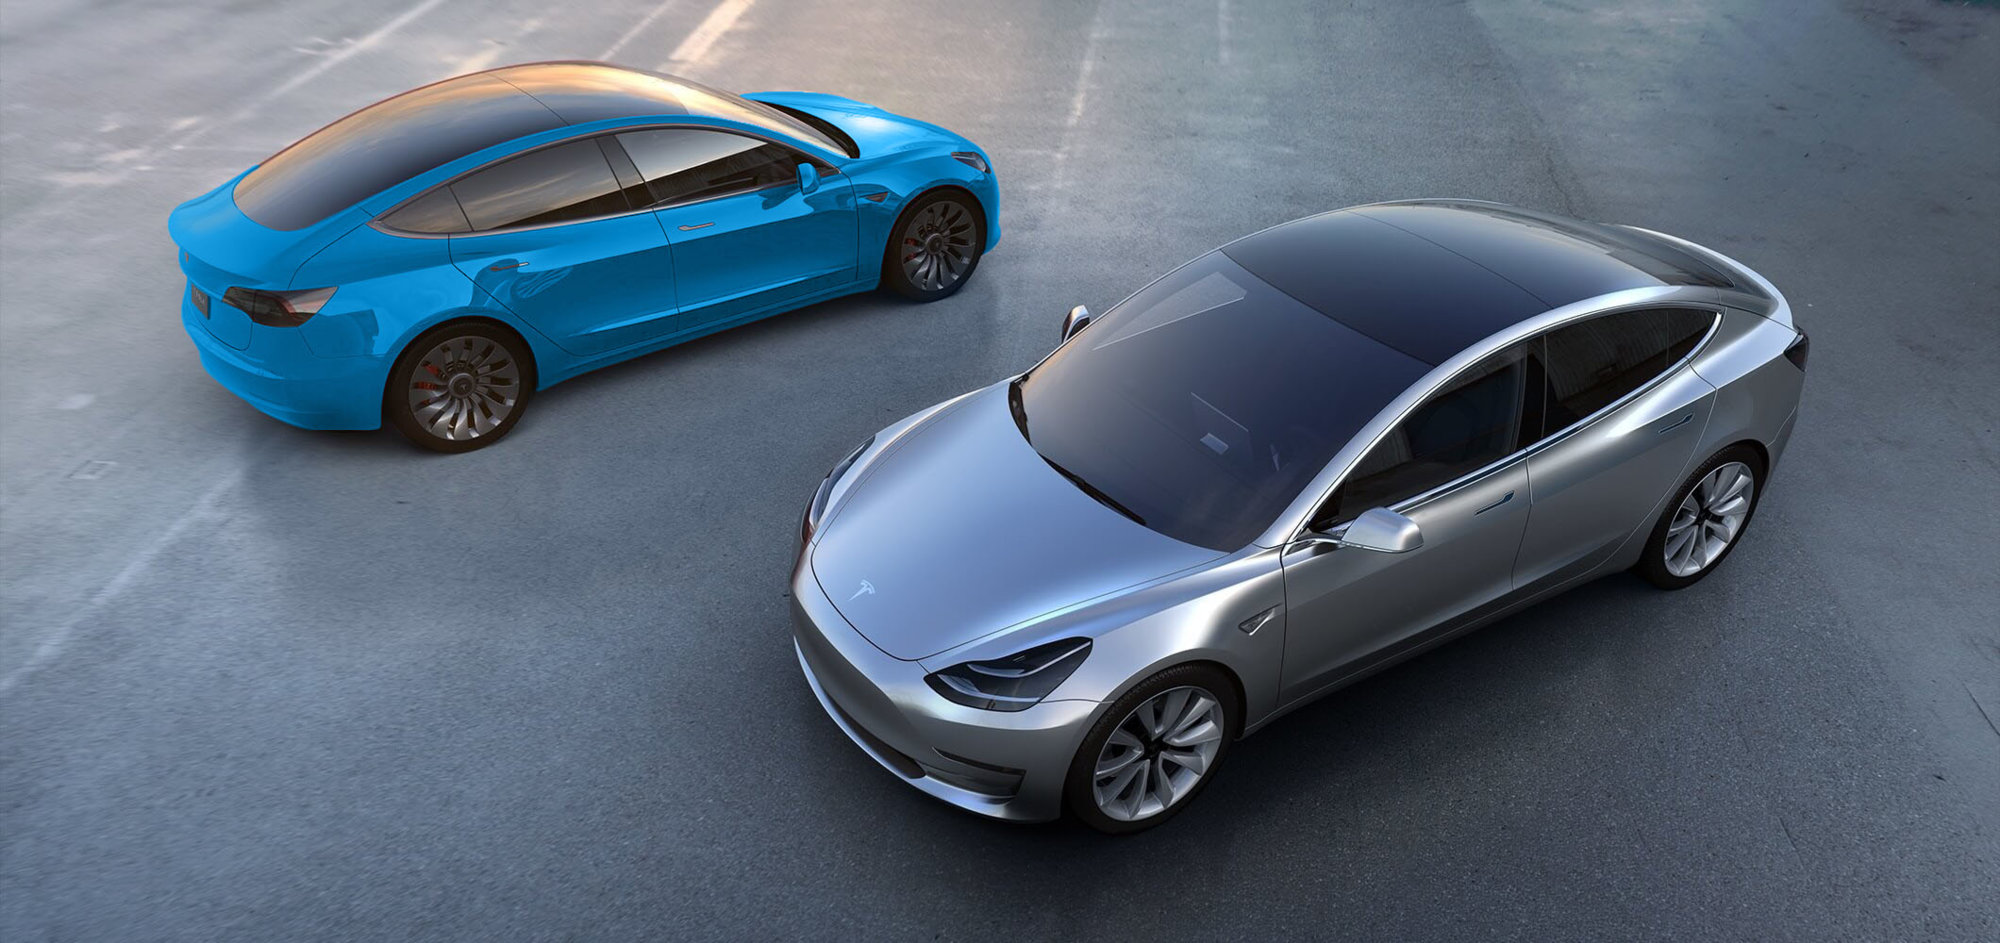 tesla-model-3-gets-rendered-in-dozens-of-colors-looks-good-in-all-of-them_5.jpg